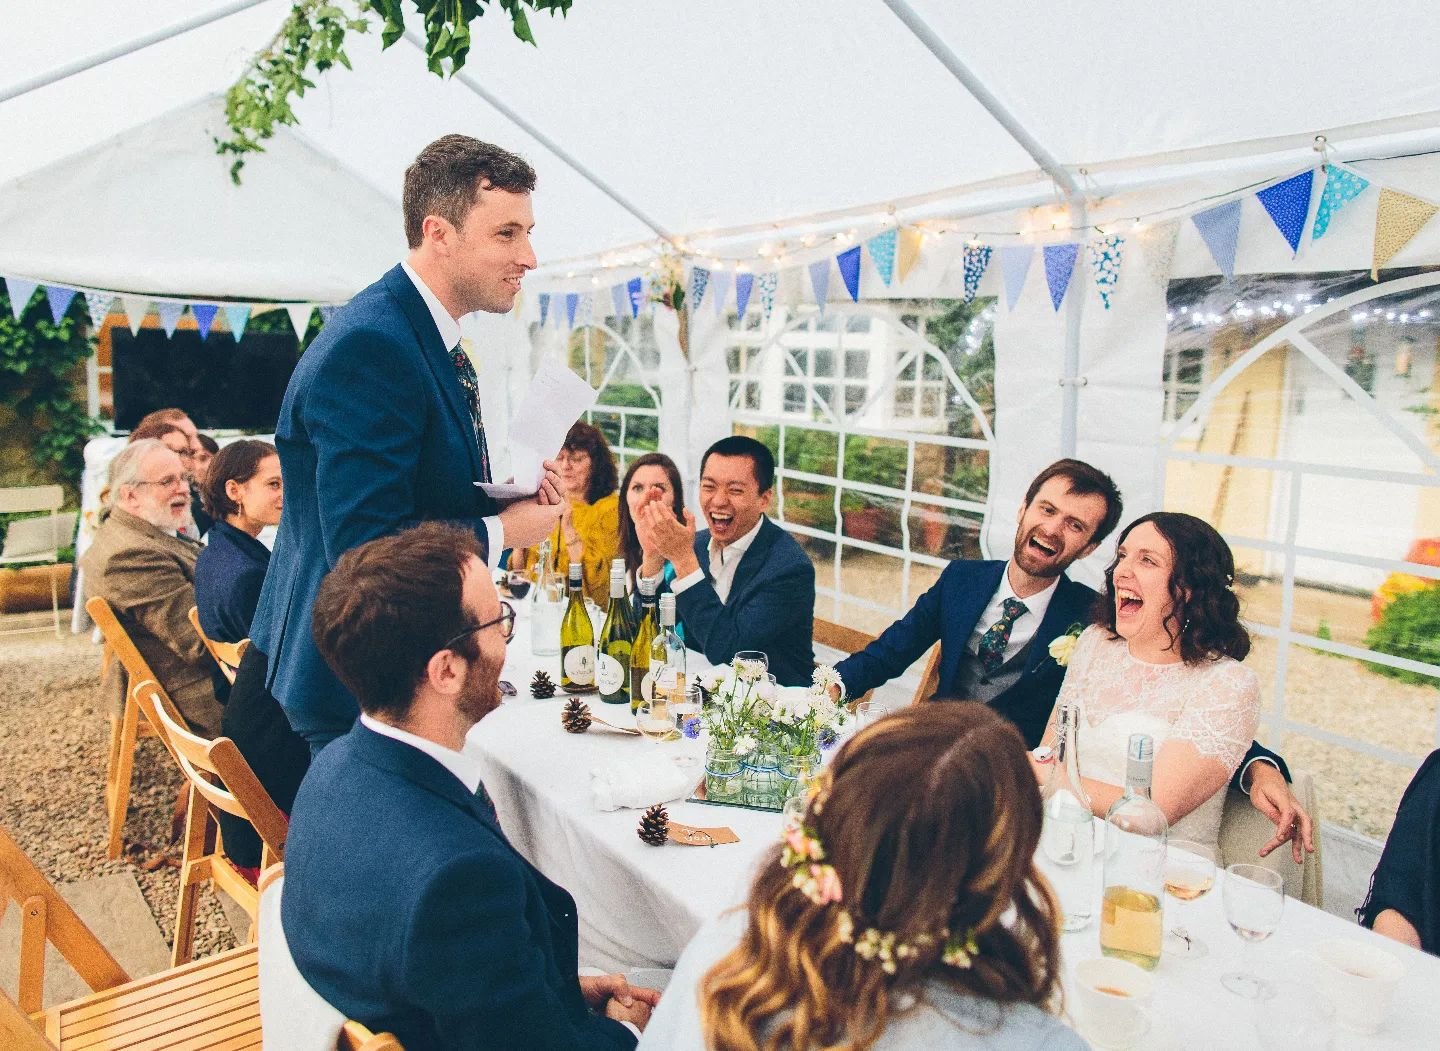 Speeches at Rachel &amp; Pete's marquee wedding in North Yorkshire.

They chose @jervaulxabbeyweddings to get married followed by a beautiful garden party afterwards.

#marqueewedding
#yorkshiredaleswedding
#northyorkshireweddingphotographer
#2025bri